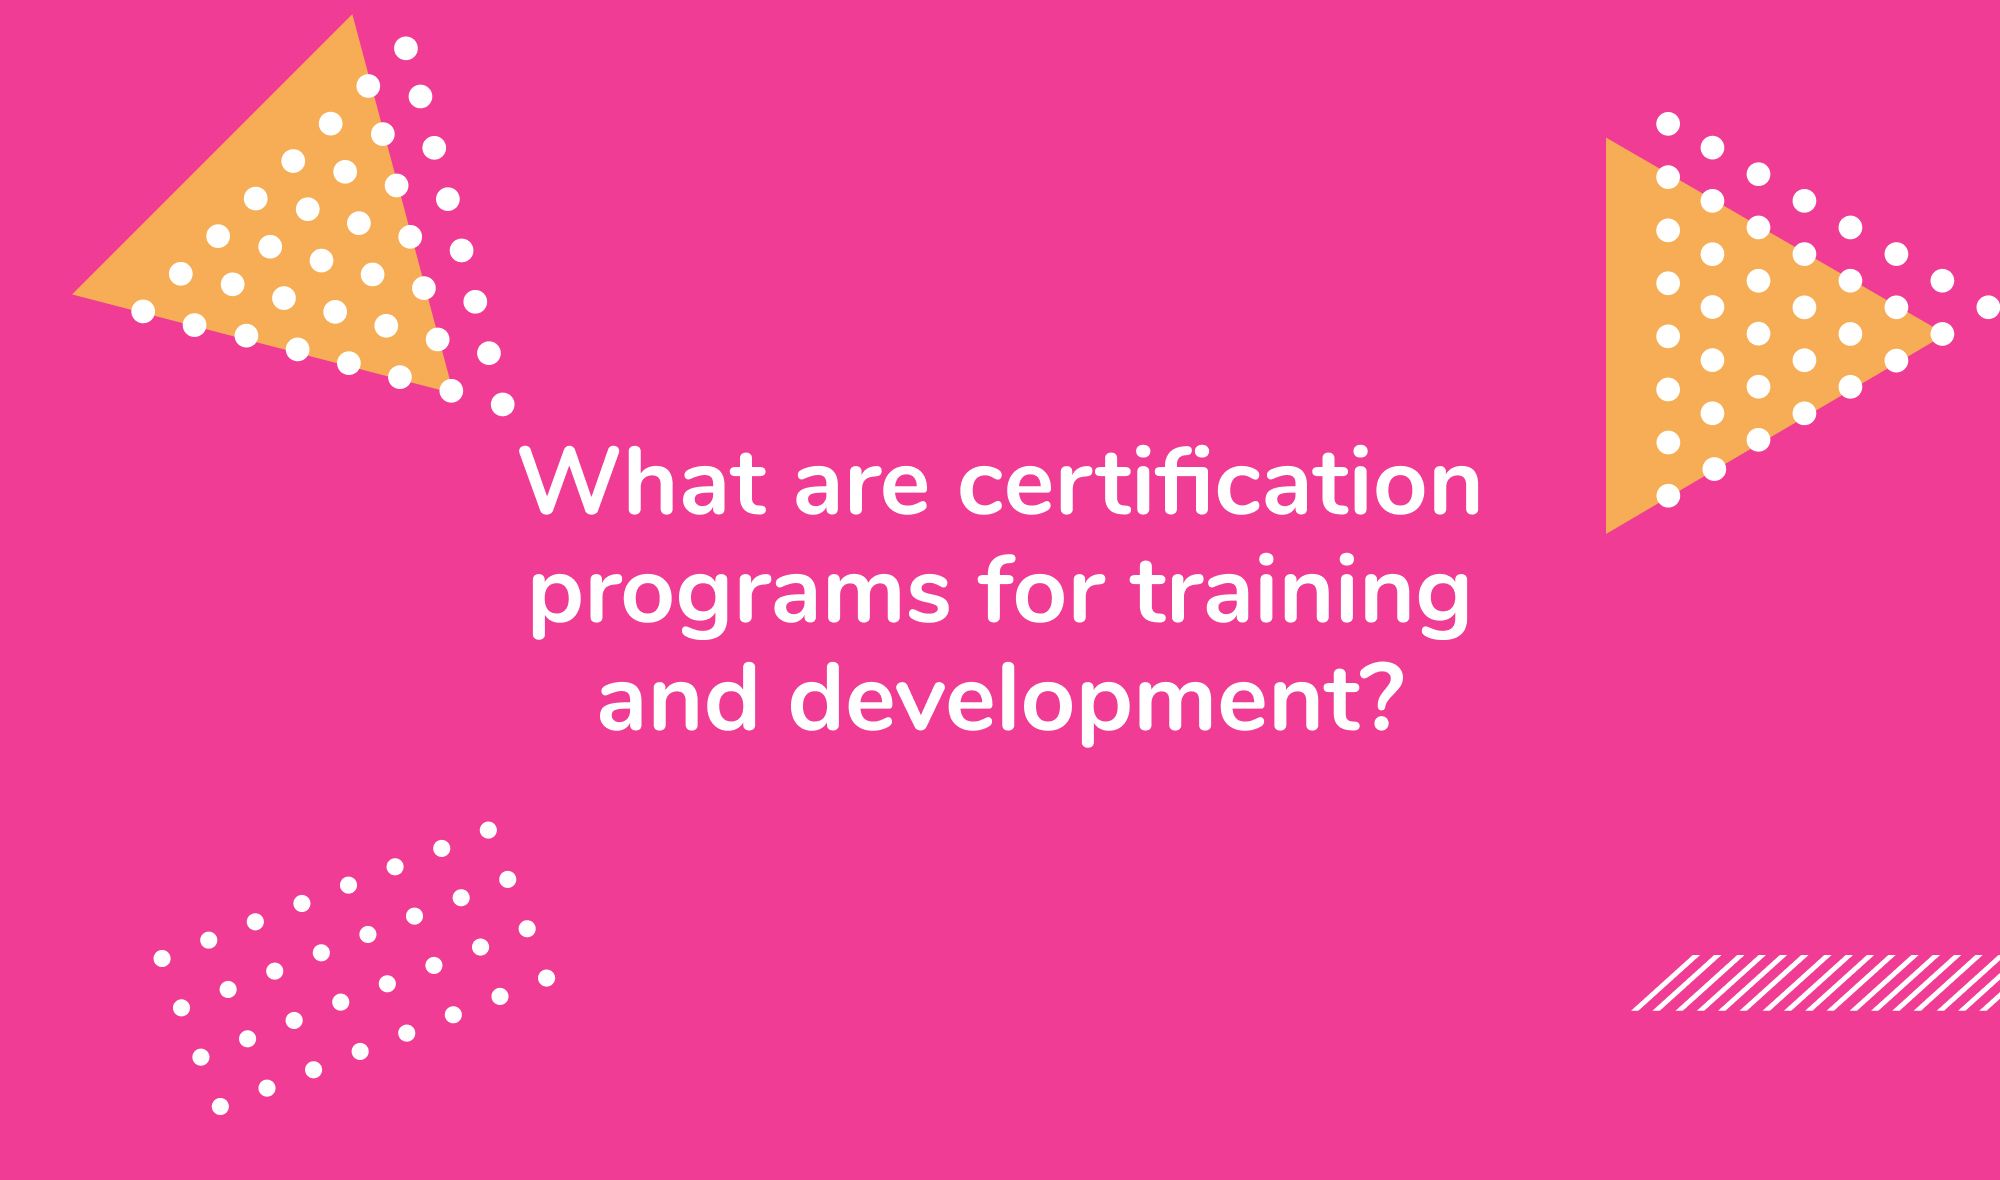 What are certification programs for training and development?